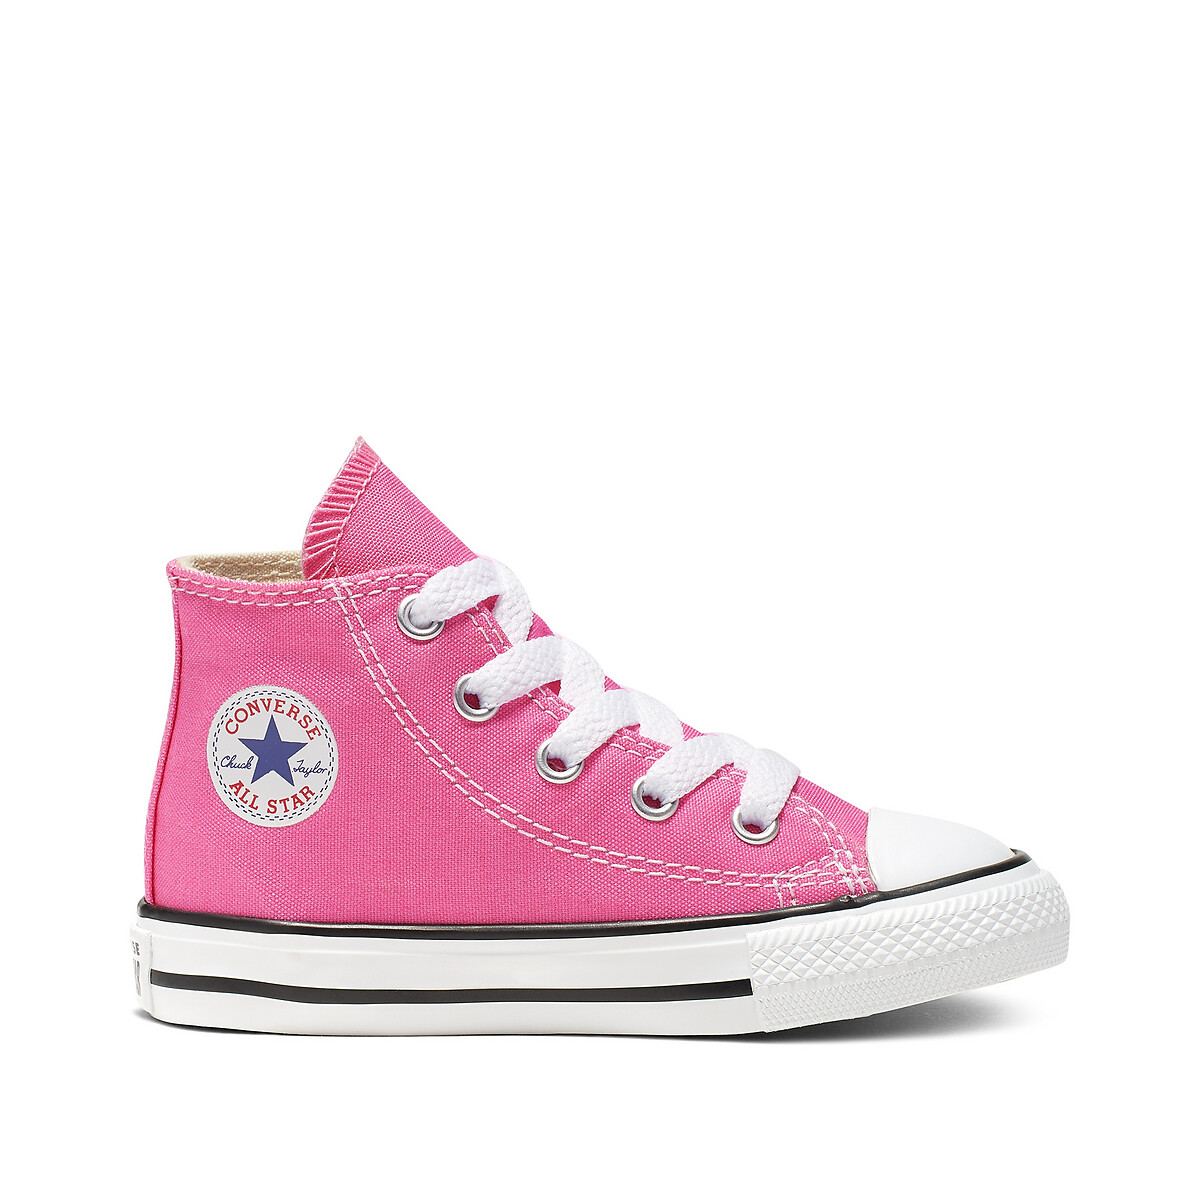 Markér bestå Nysgerrighed Children's Clothing | Kids & Teen Clothes CONVERSE | La Redoute